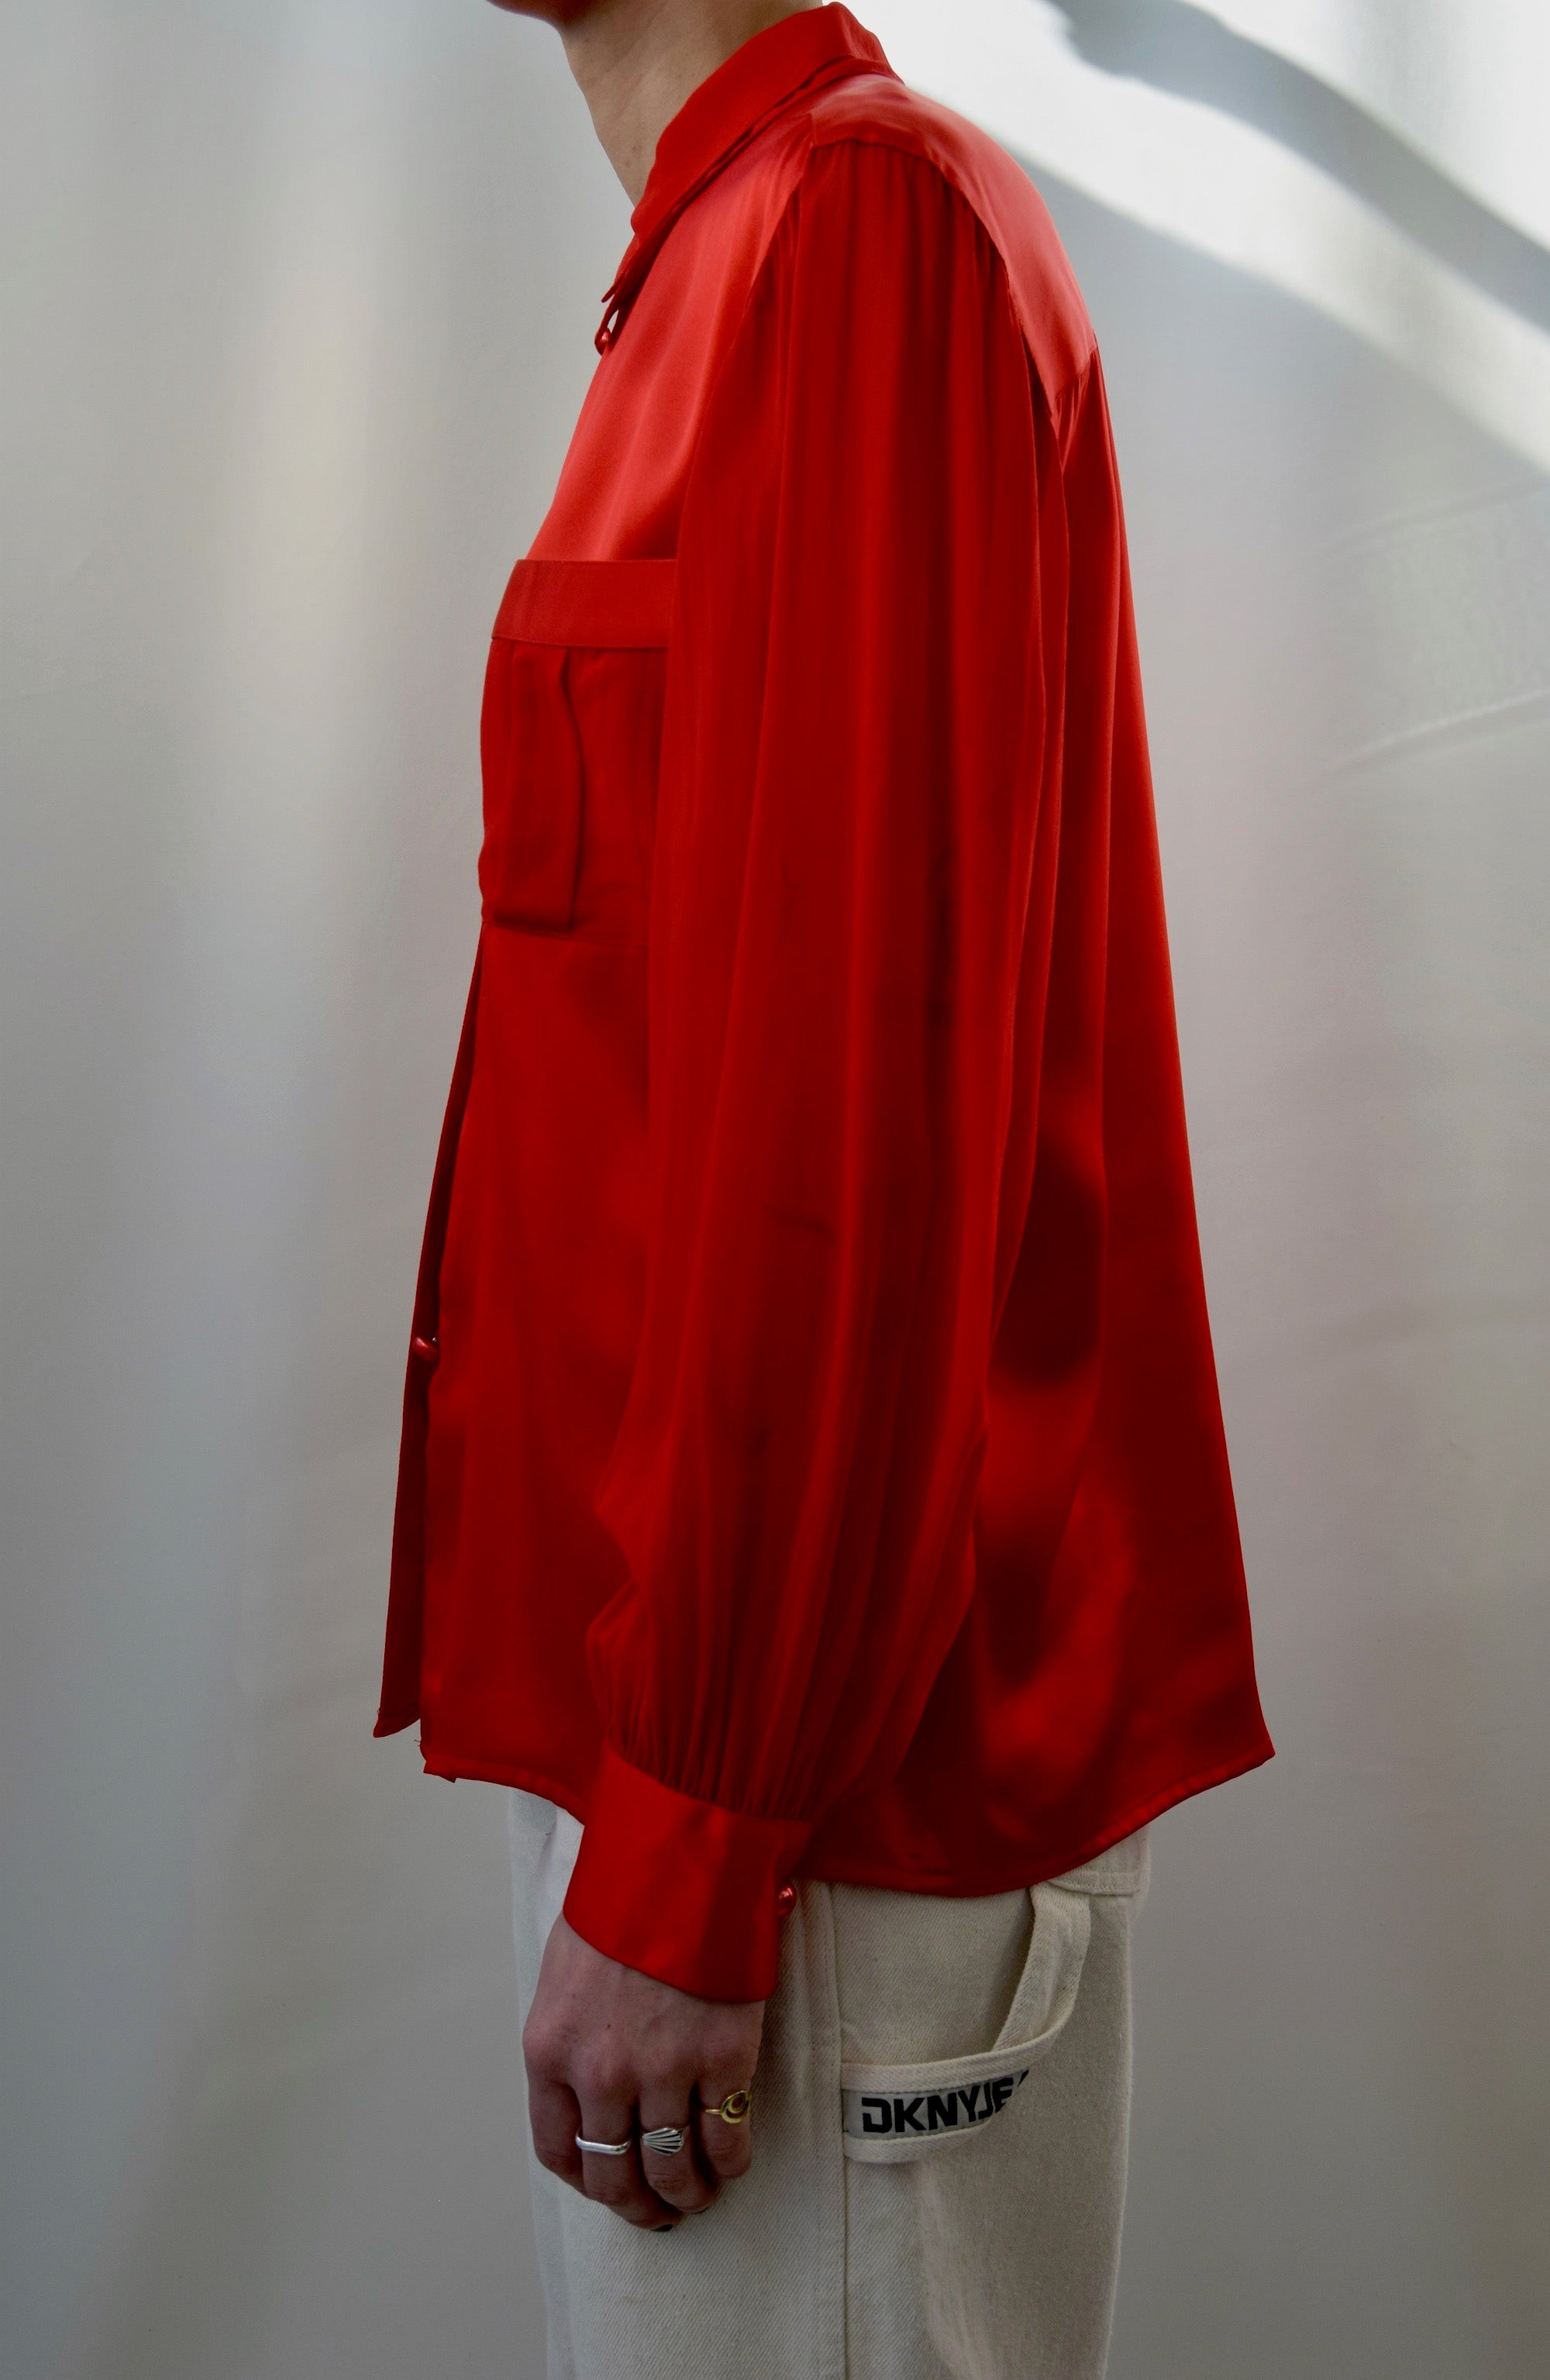 Crimson Red Satin and Sheer Silk Blouse